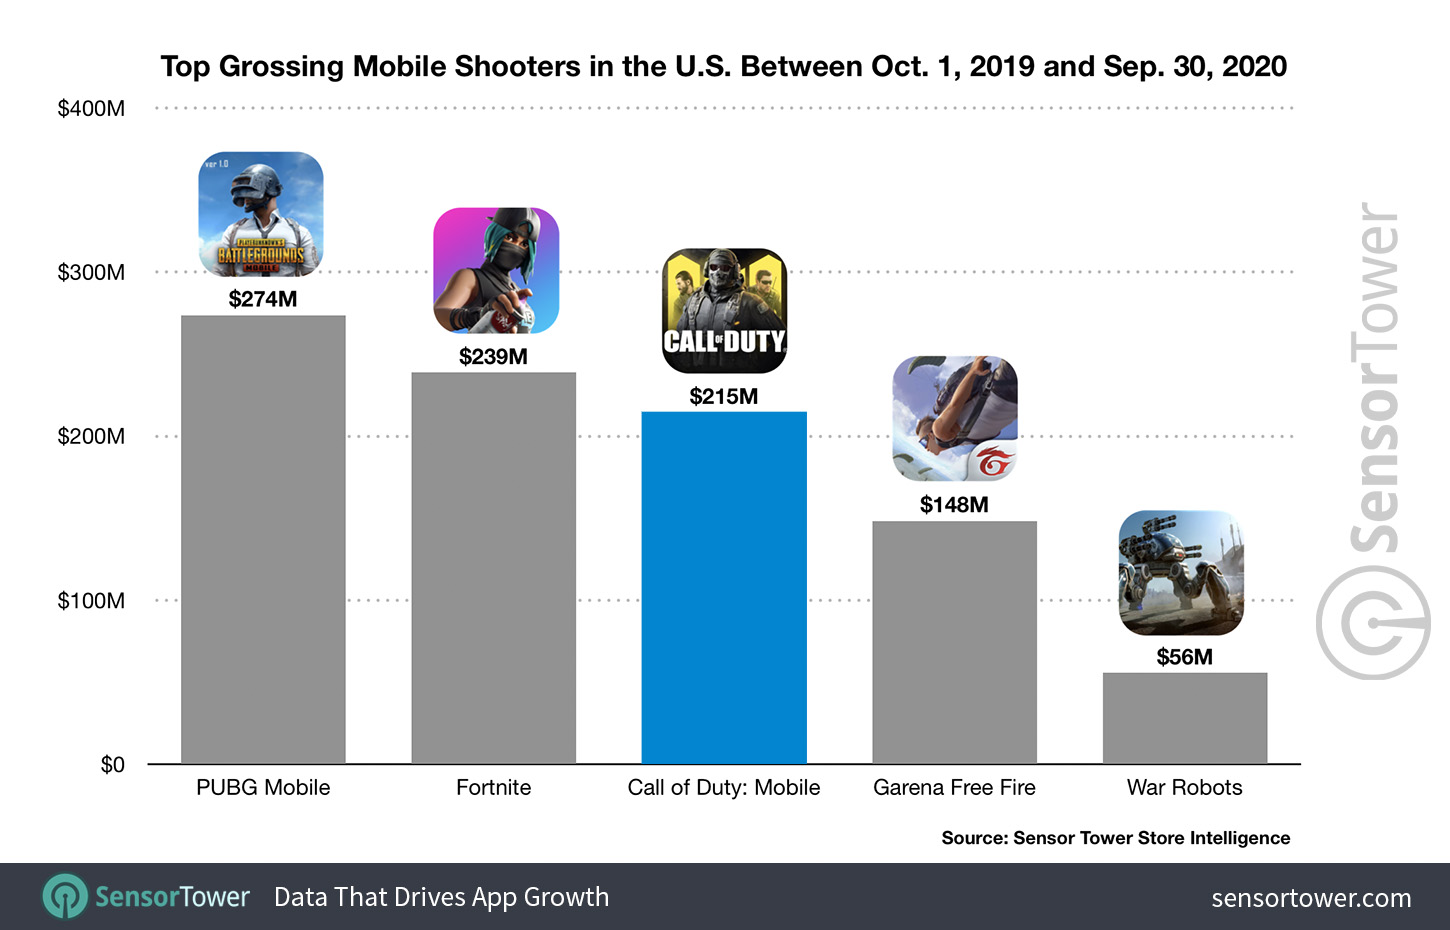 Top Grossing Shooters in the U.S. from October 1, 2019 to September 30, 2020